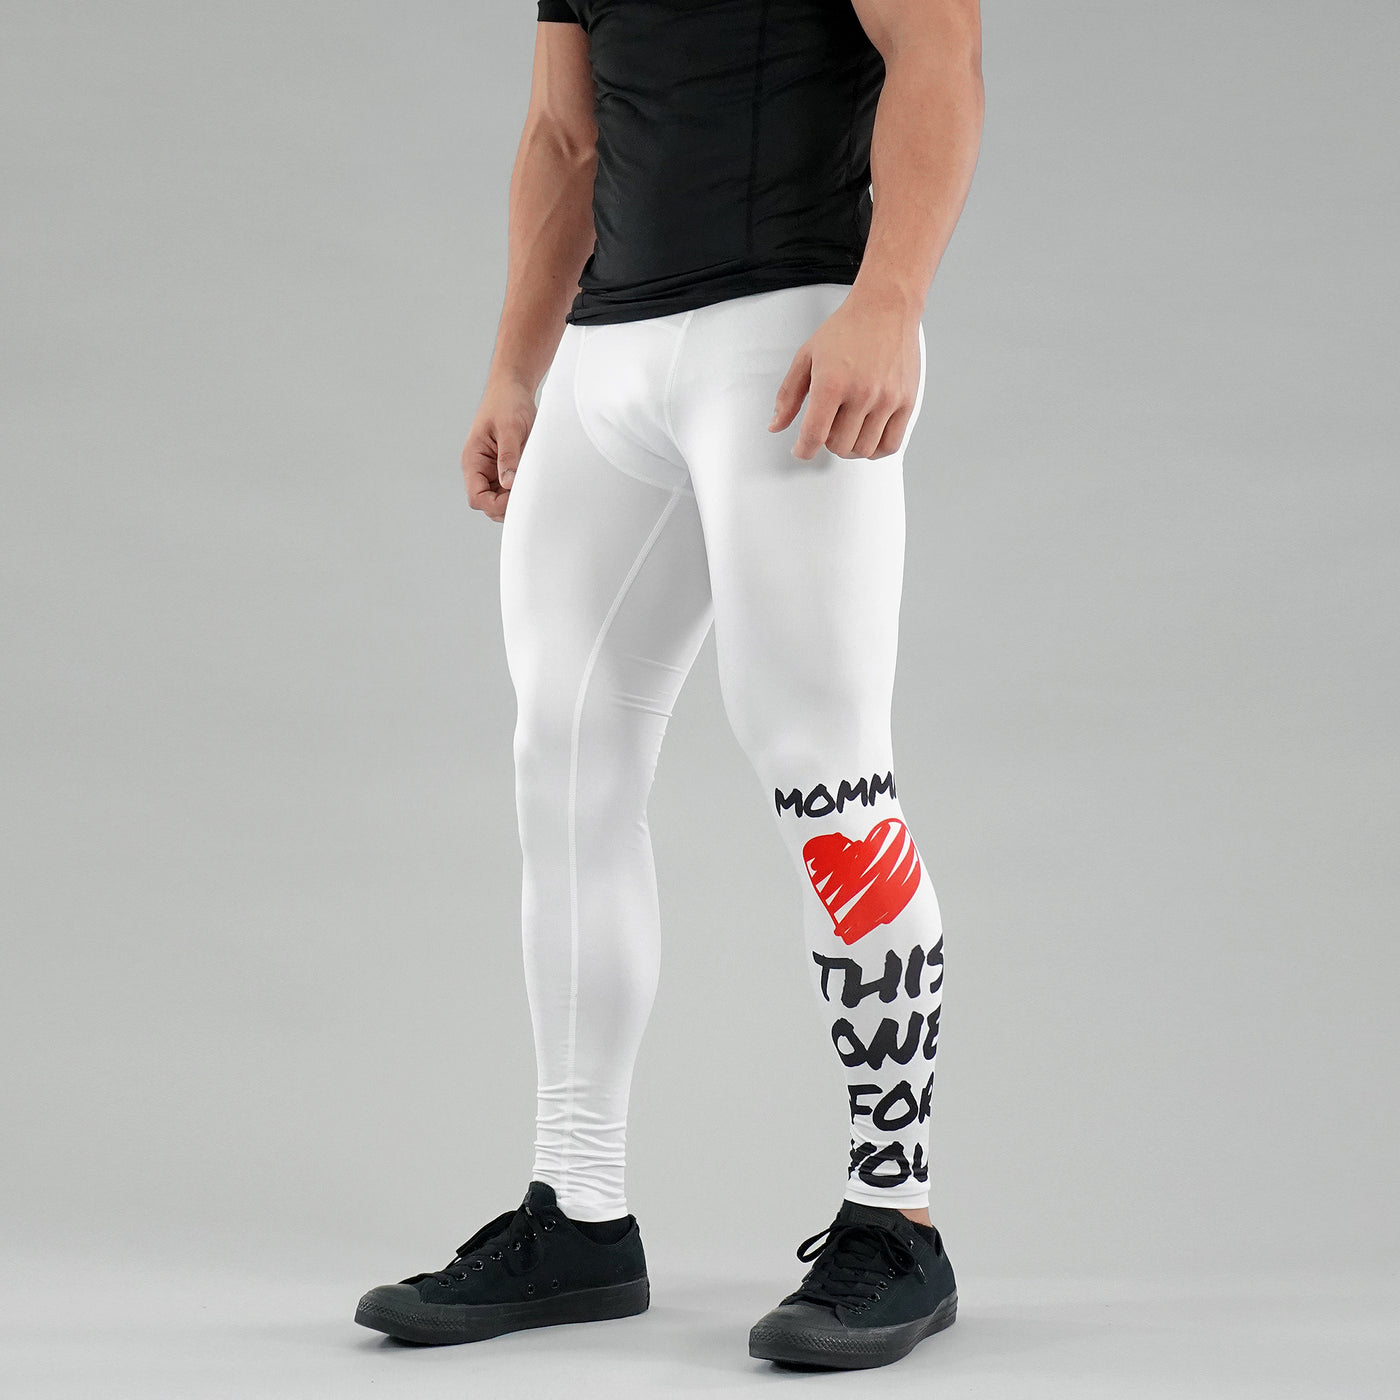 Momma Tights for Men